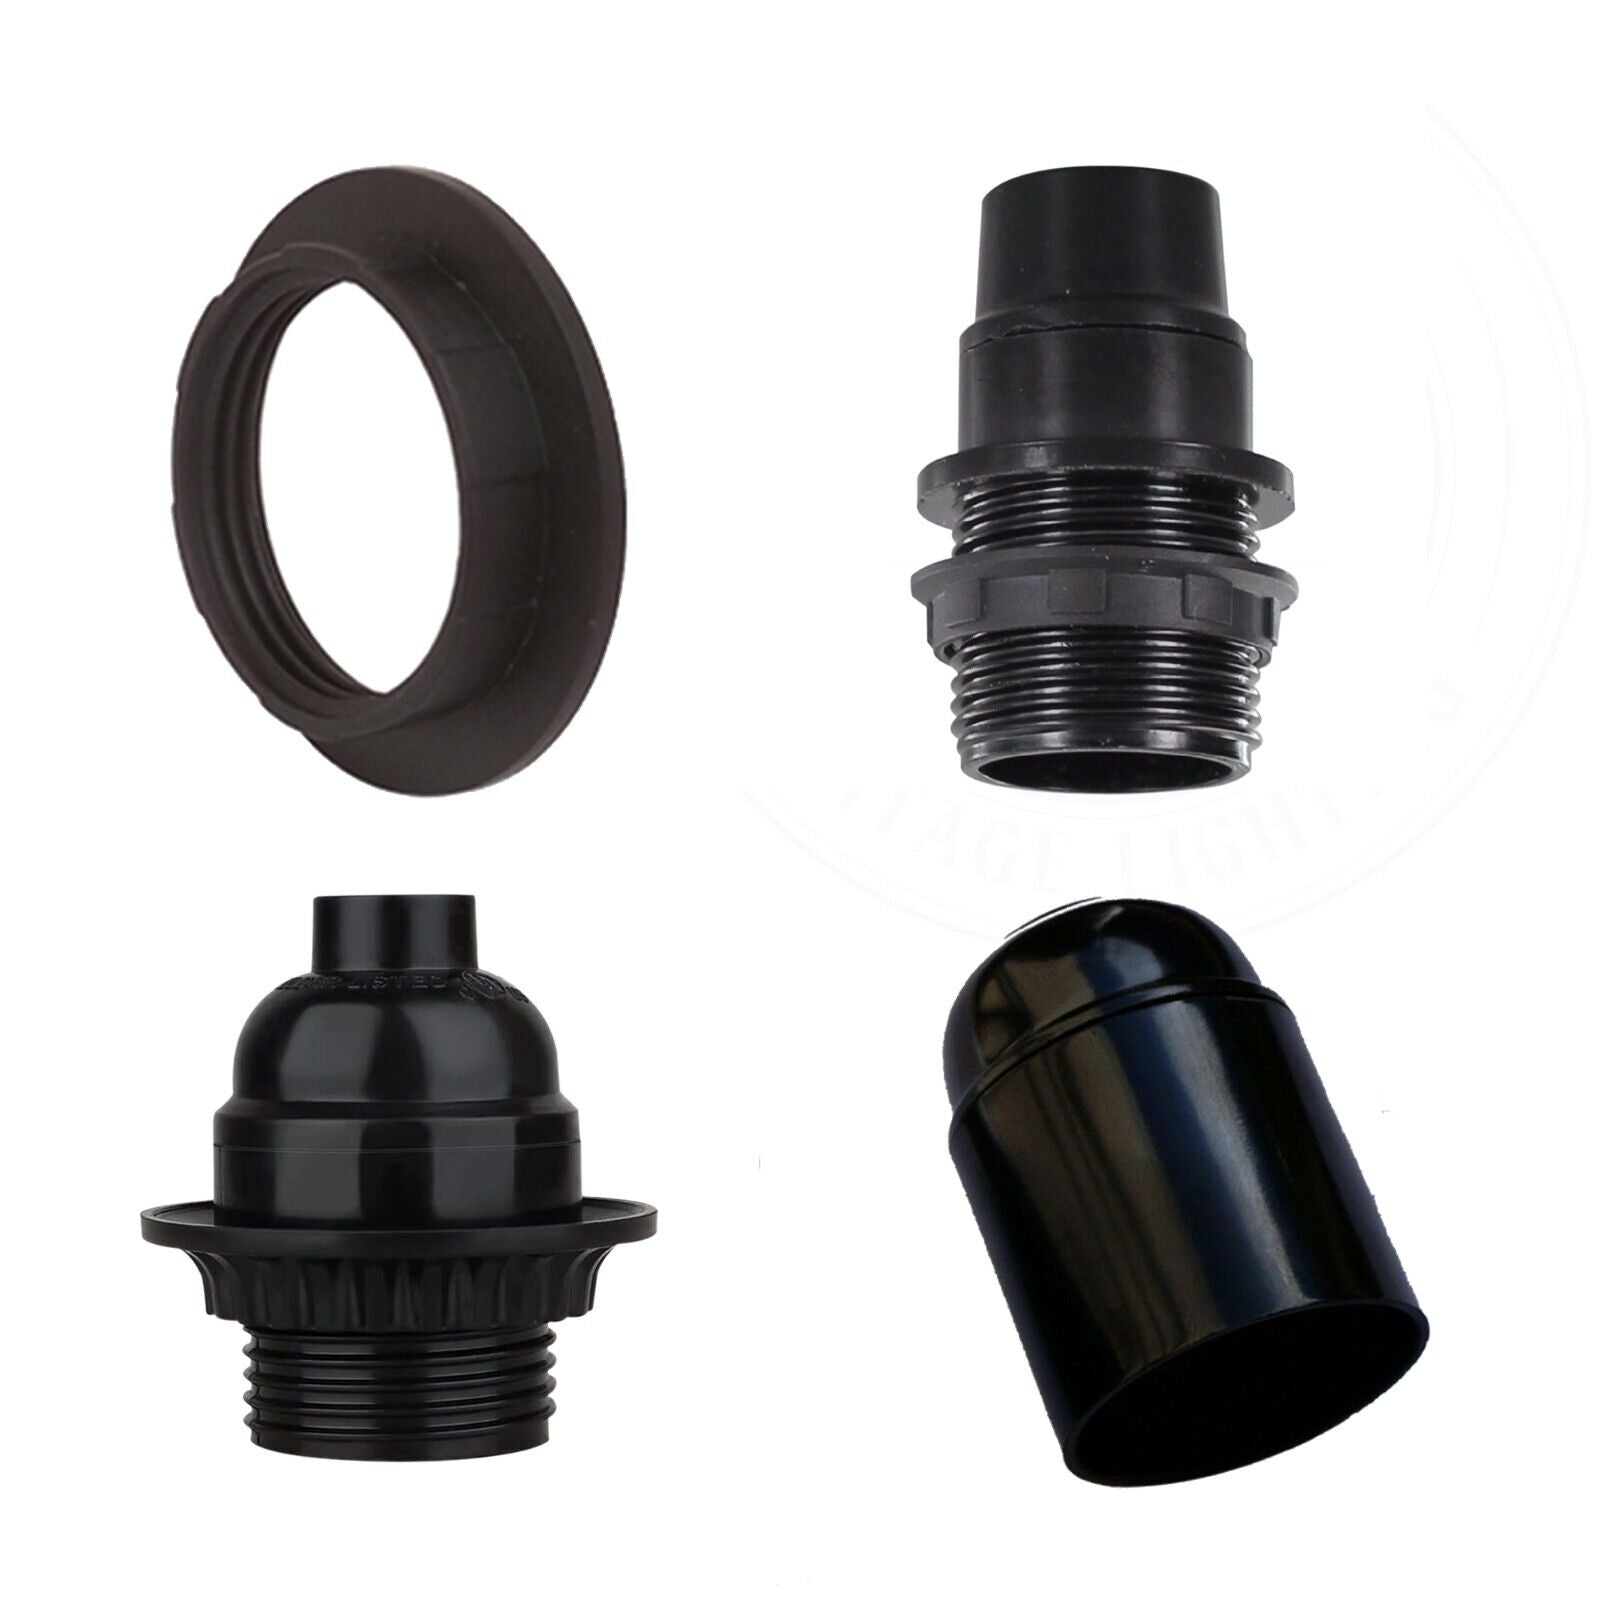 Black Light Shade Collar Ring Adaptor E27 Lamp Bulb Holder Screw connected and Made of Plastic.